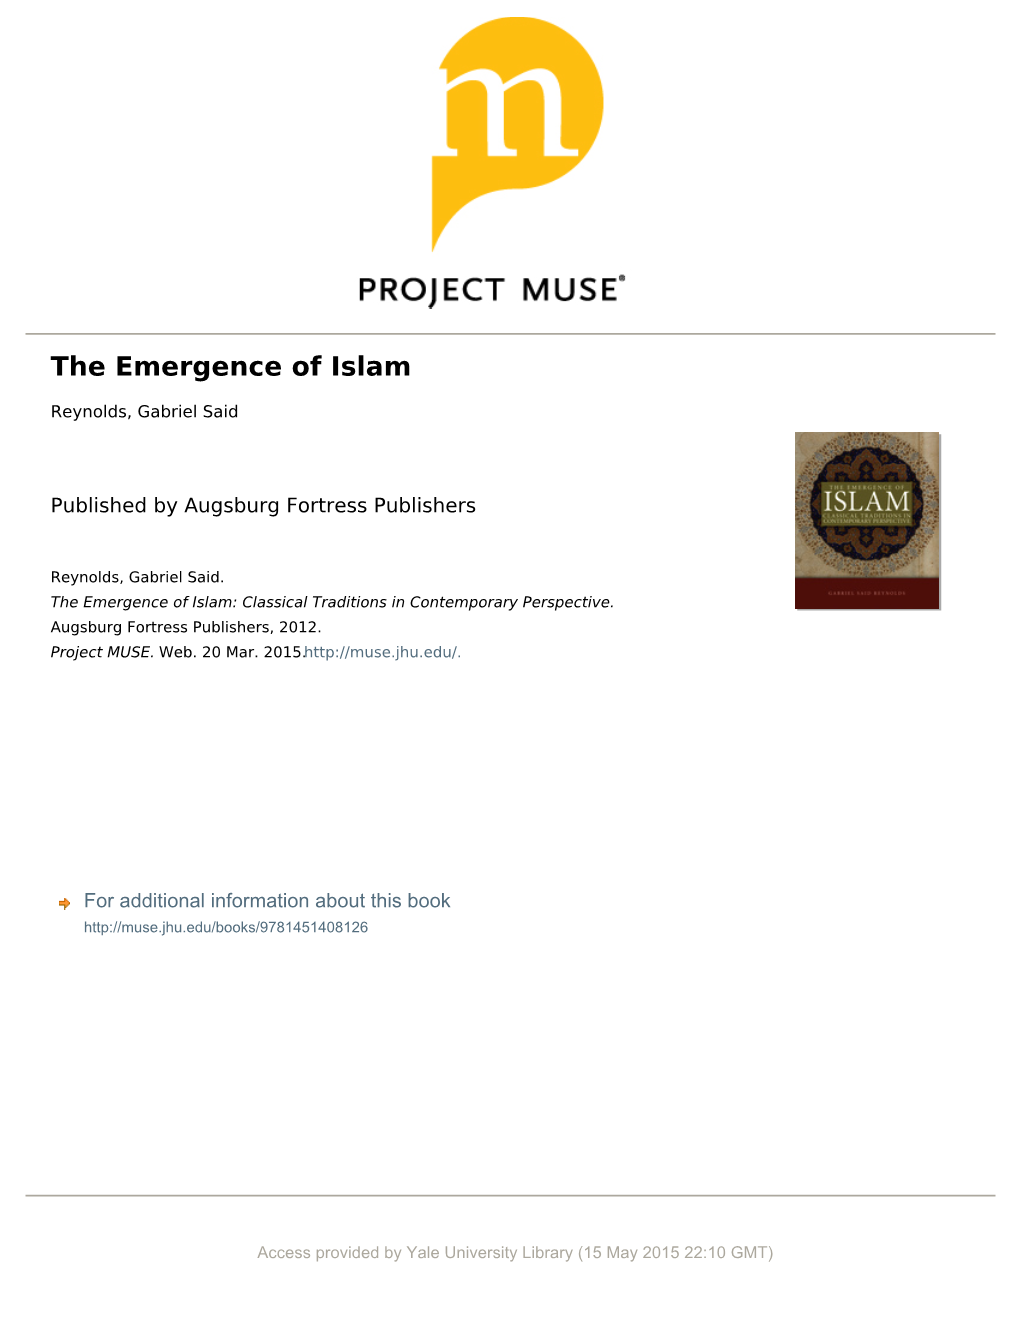 The Emergence of Islam, As It Biographical Information on Muhammad Or Is Usually Told, Is Rather Straightforward